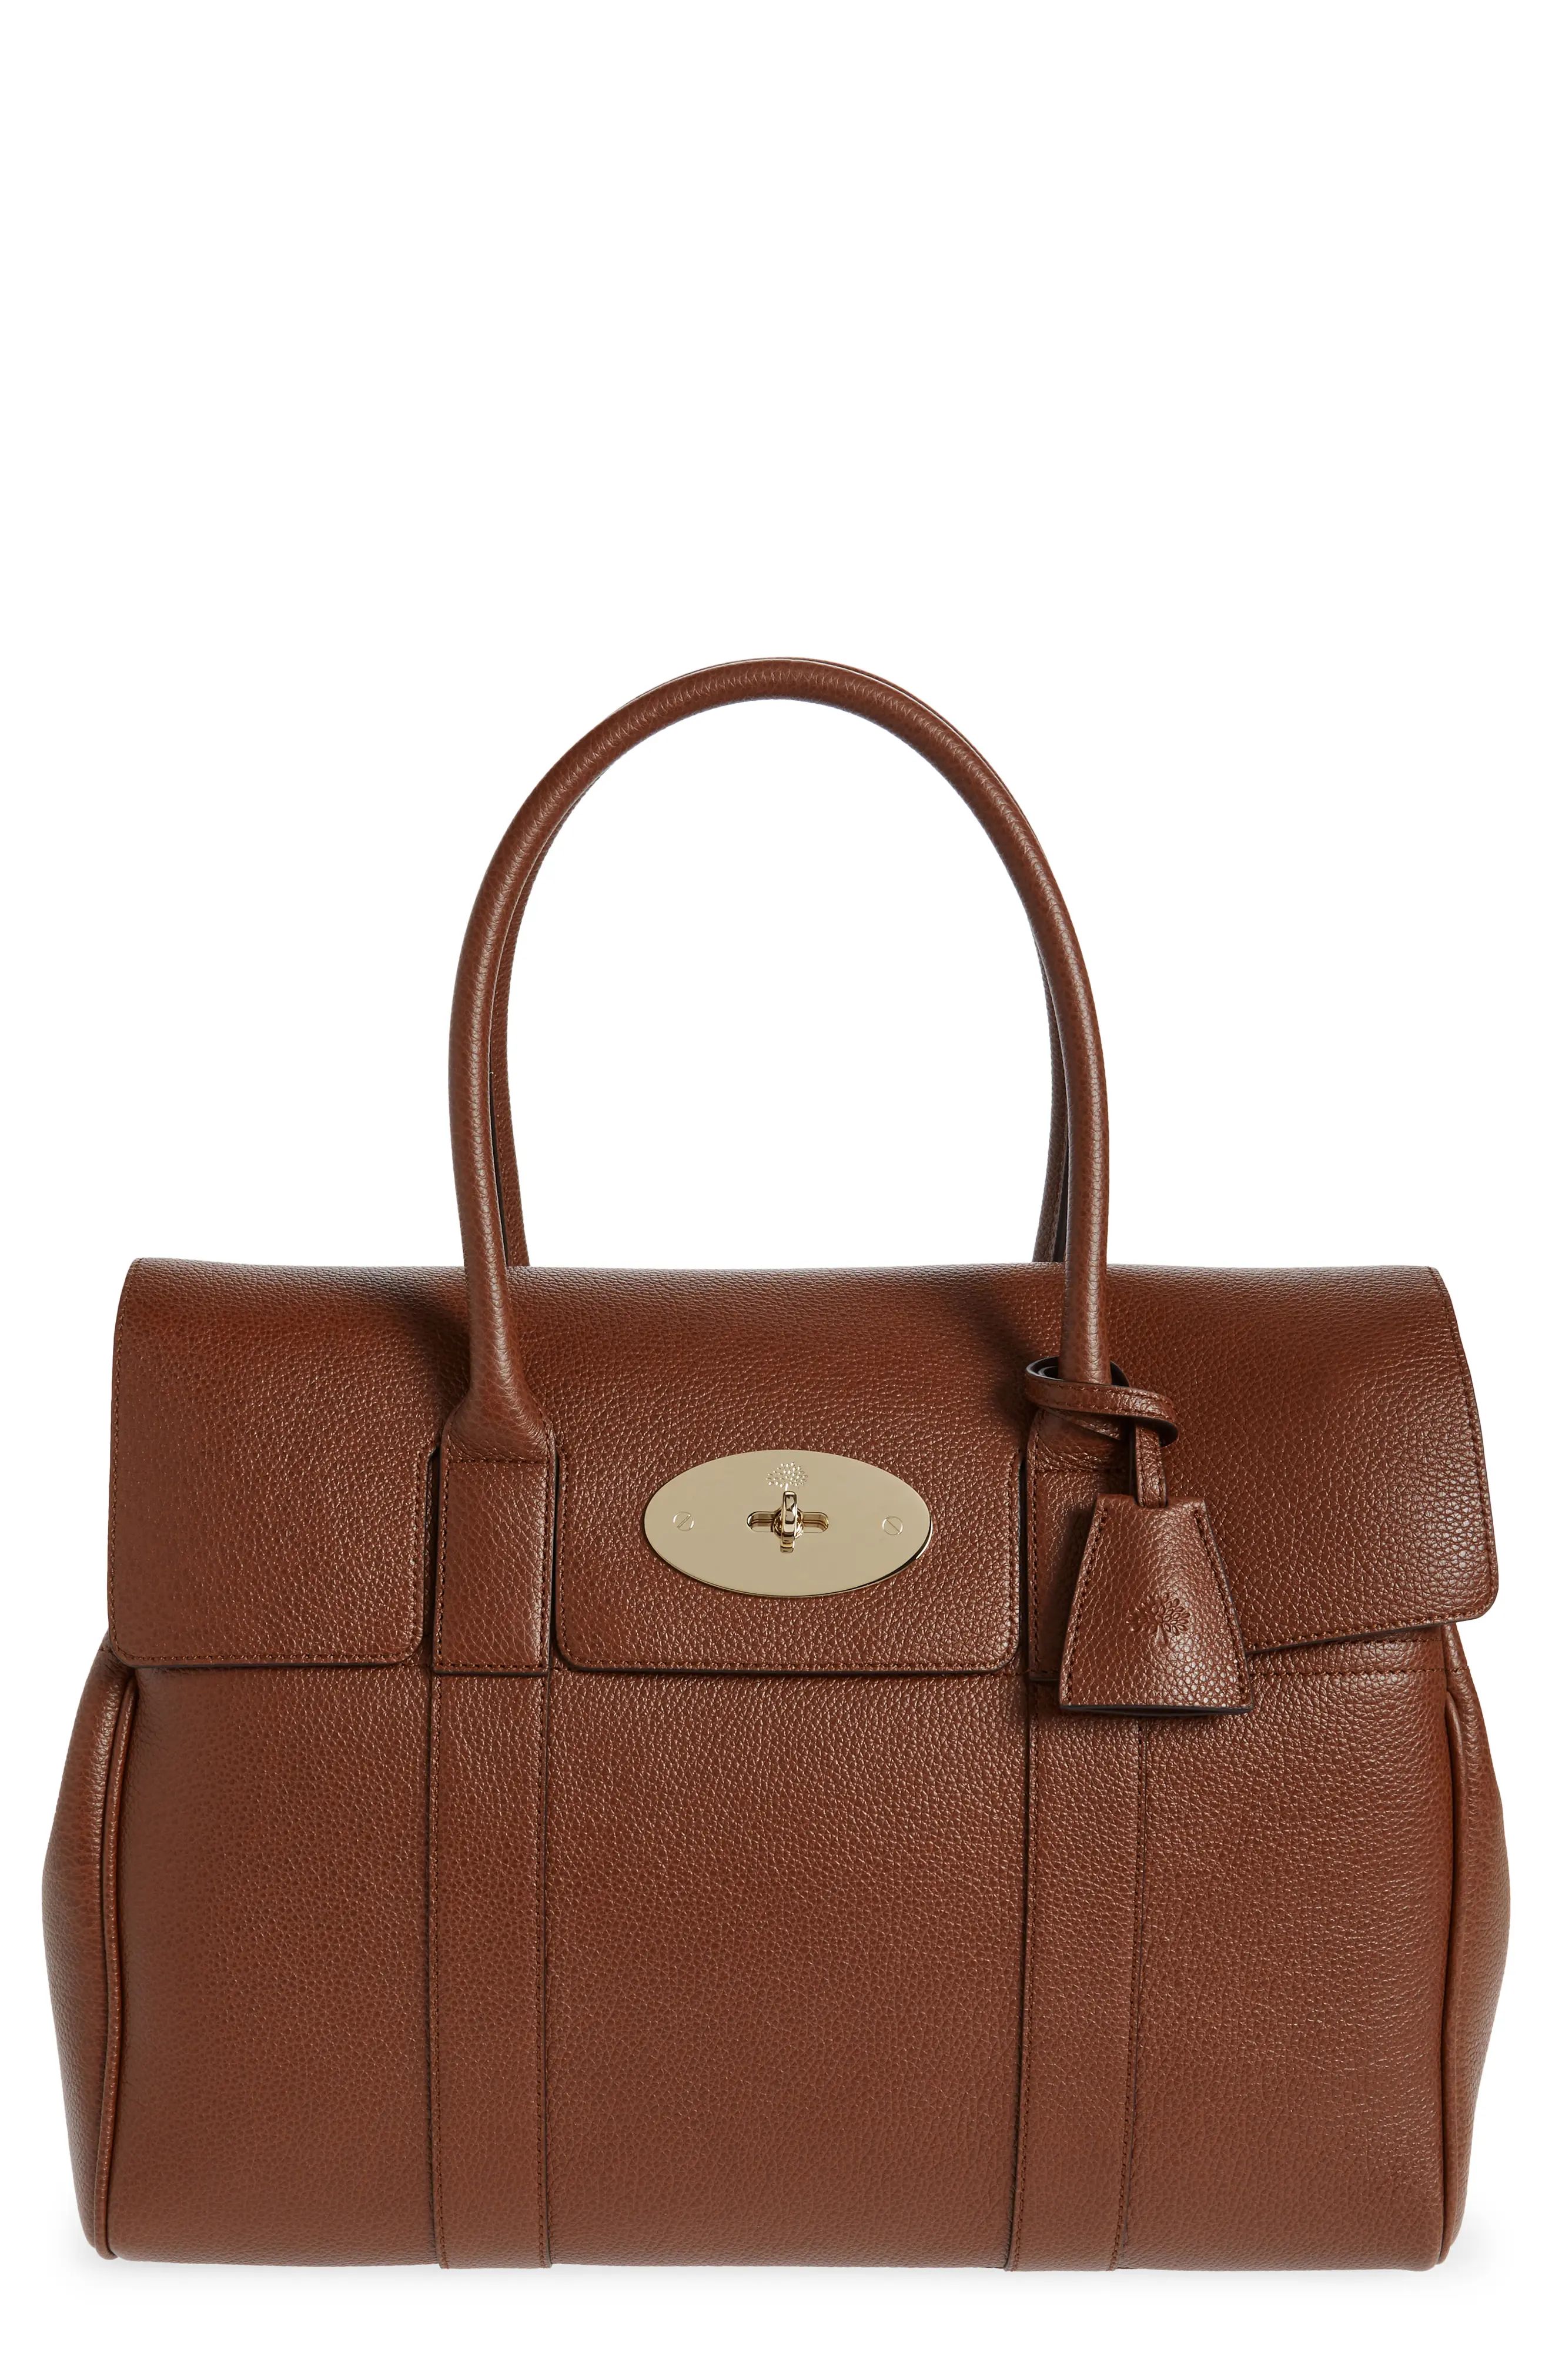 Mulberry Bayswater Grained Leather Satchel in Oak at Nordstrom | Nordstrom